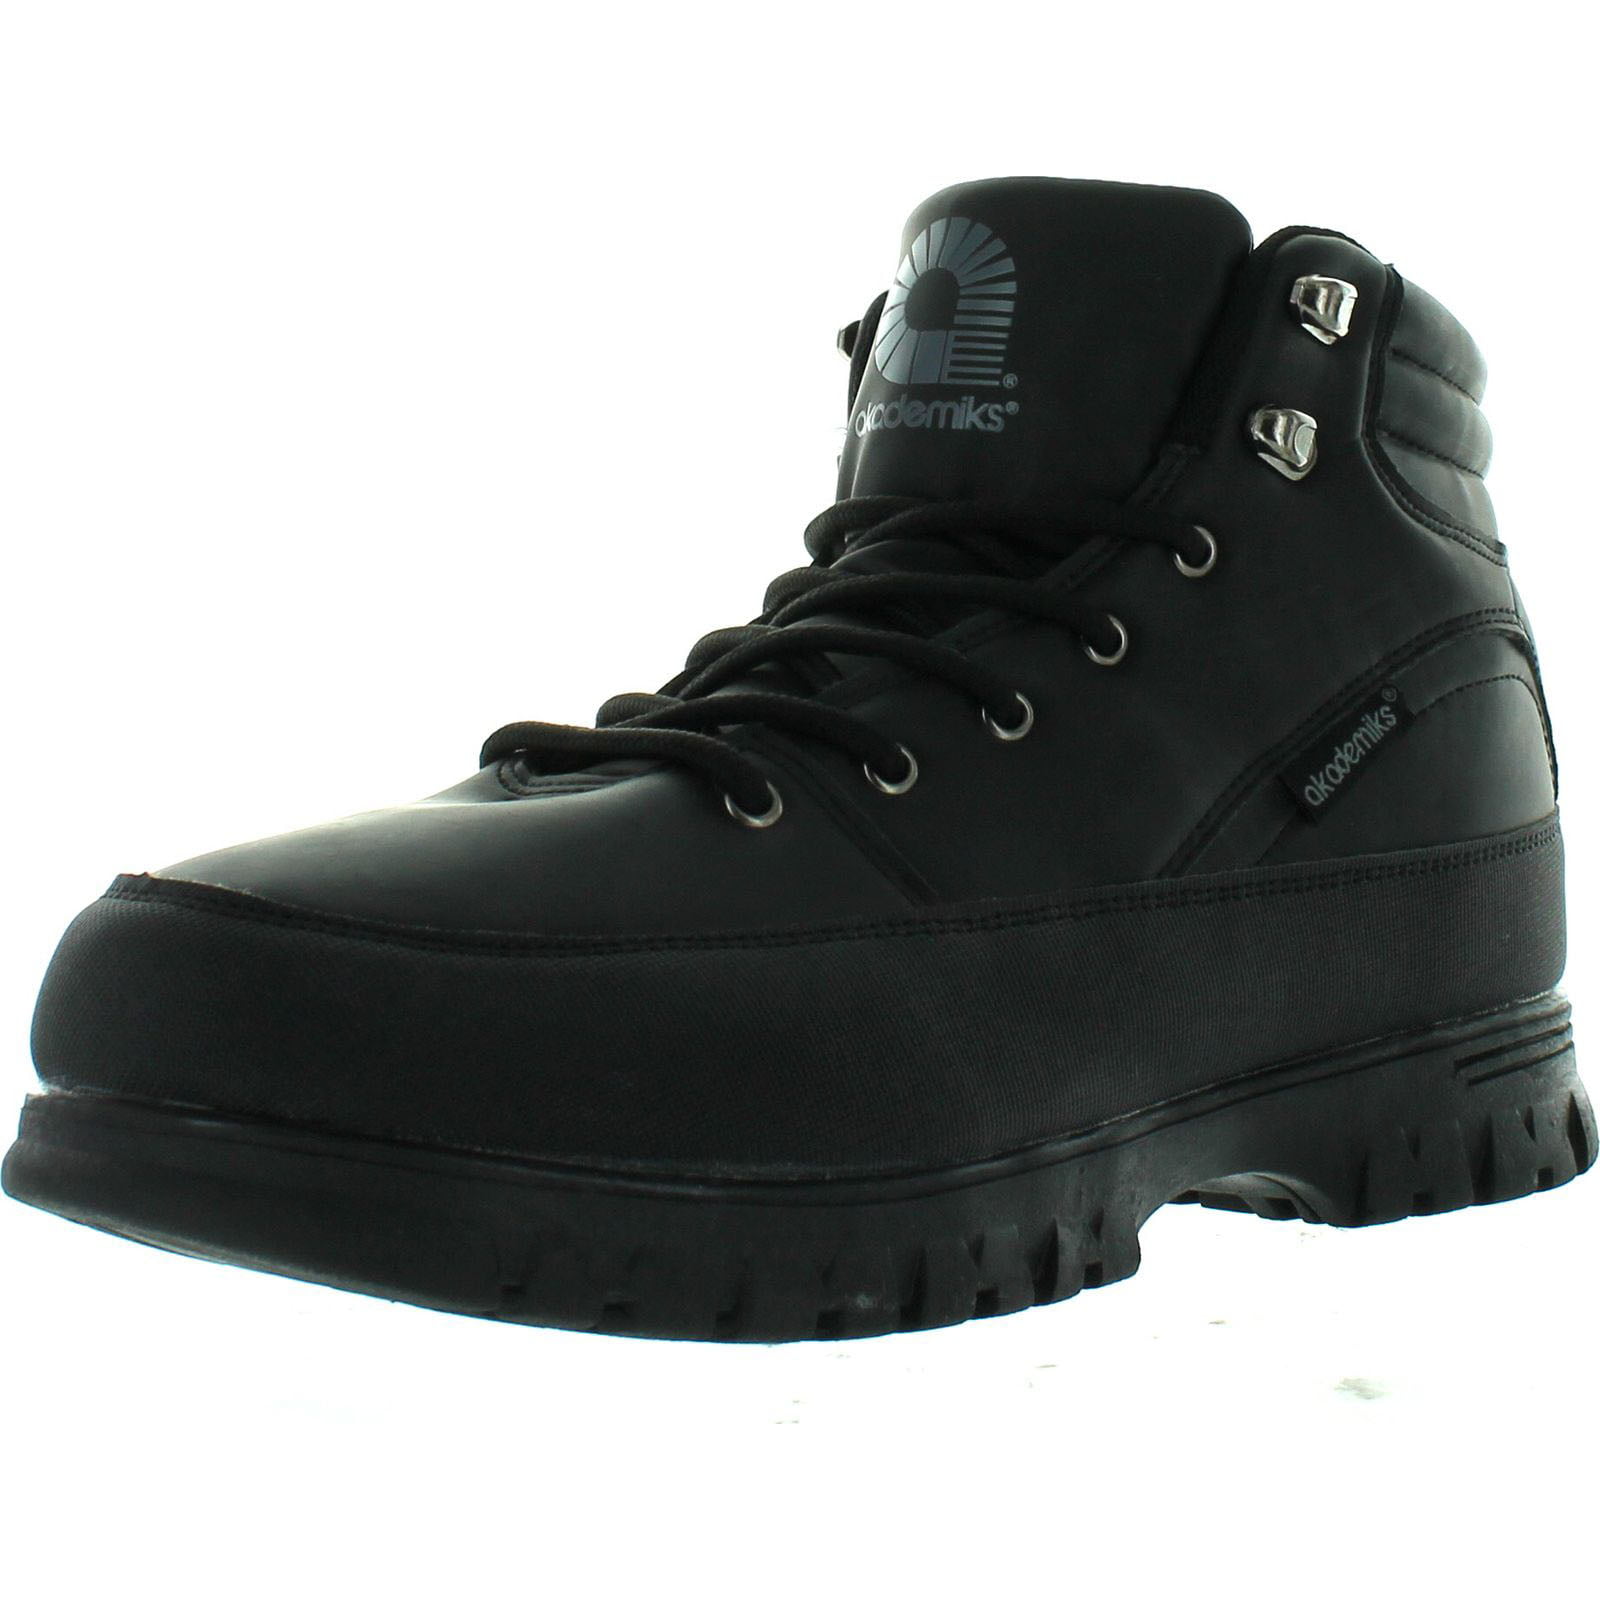 Akademiks Boots Mens Size 9.5 Black Casual 6 Eye Laced Boots Shoes New